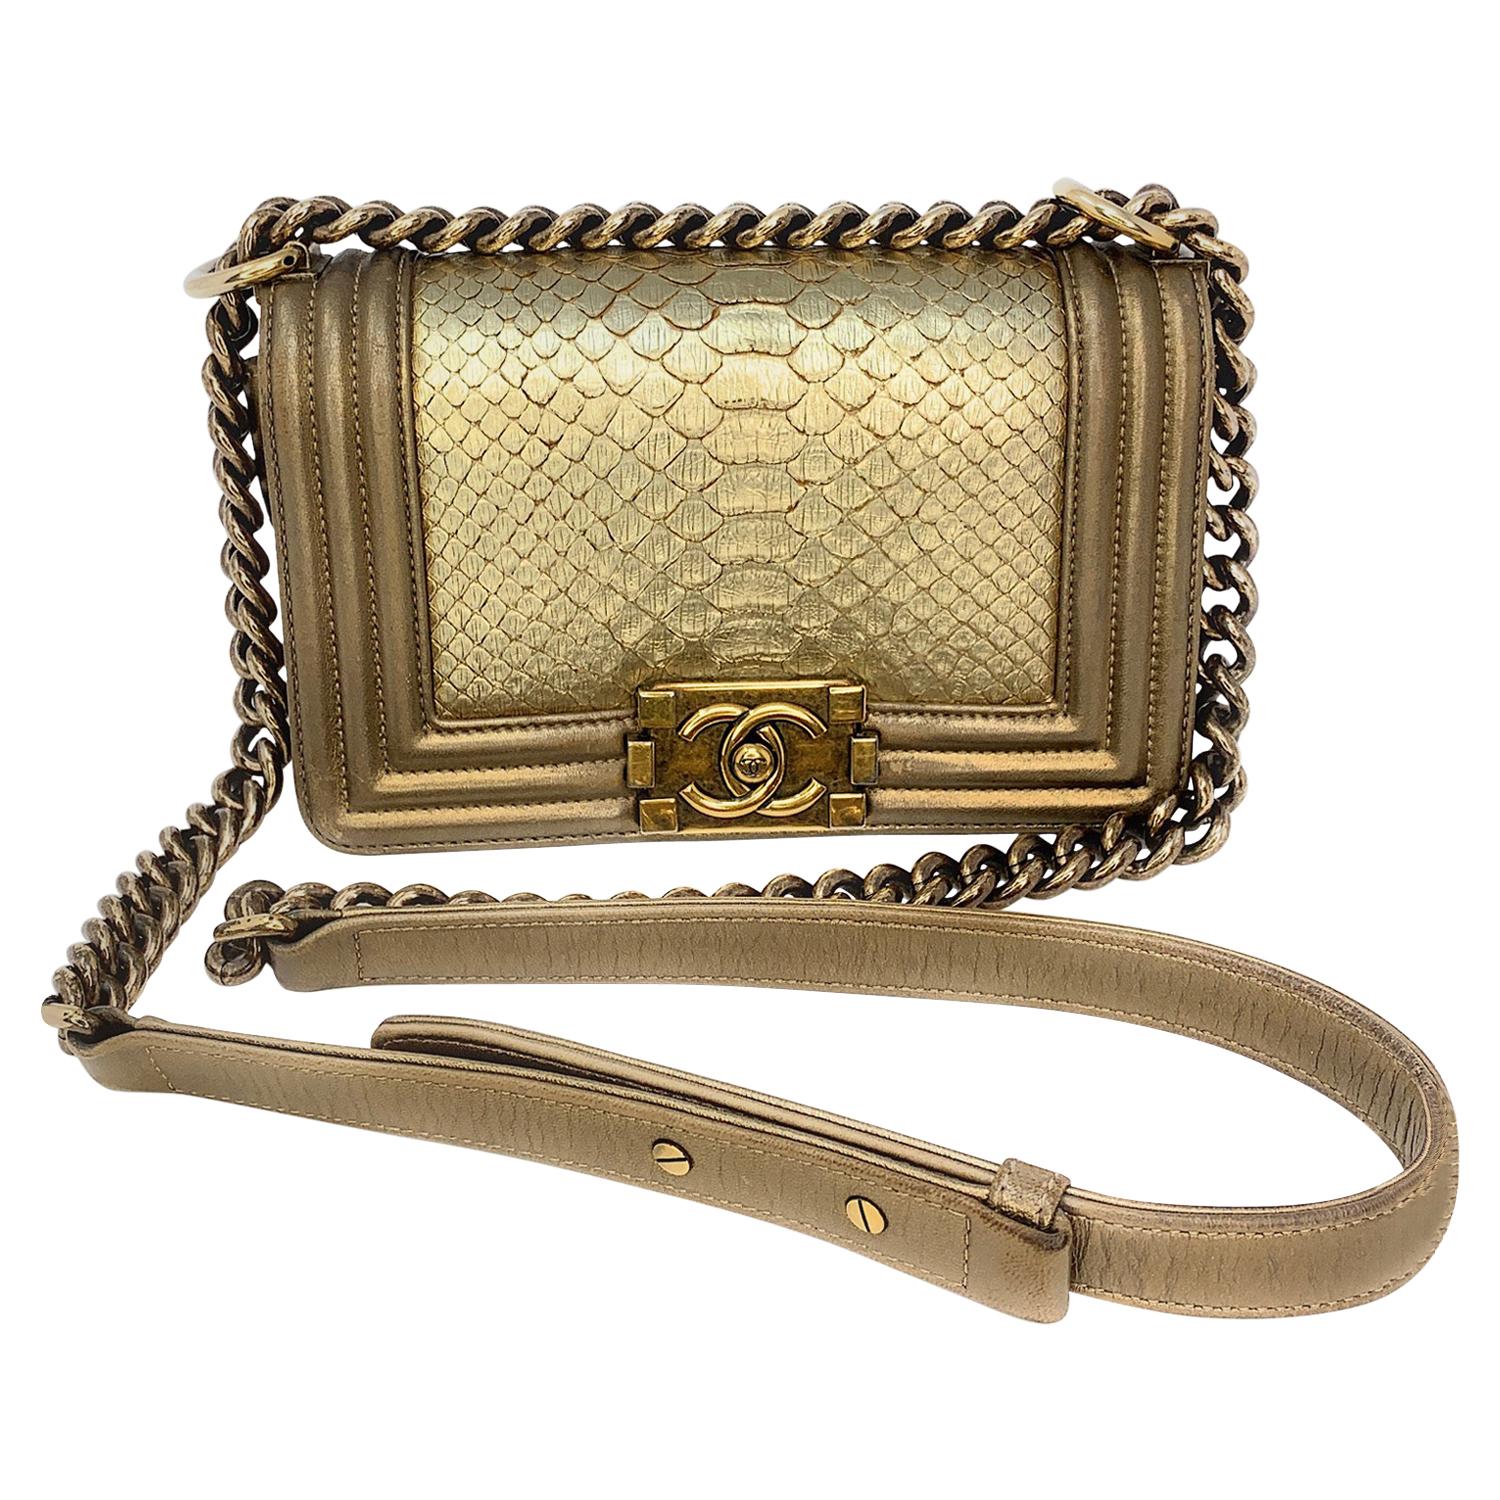 Chanel Bag Classic Single Flap Gold Python Leather with Gold Hardware –  Exquisite Artichoke